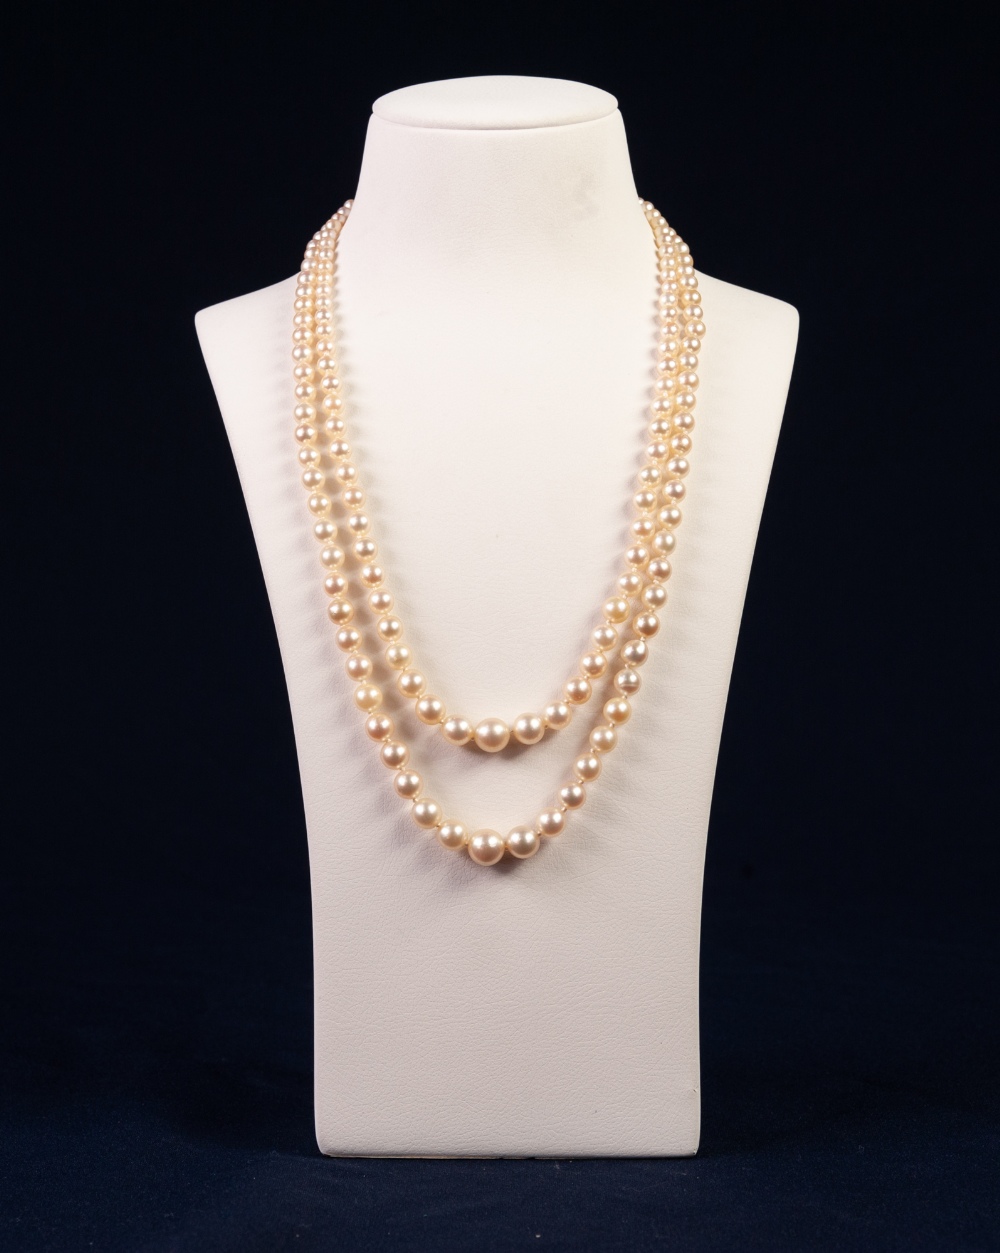 TWO STRAND NECKLACE OF GRADUATED CULTURED PEARLS, 77 & 81 pearls; 3.6mm pearls up to 9mm pearls; - Image 3 of 4